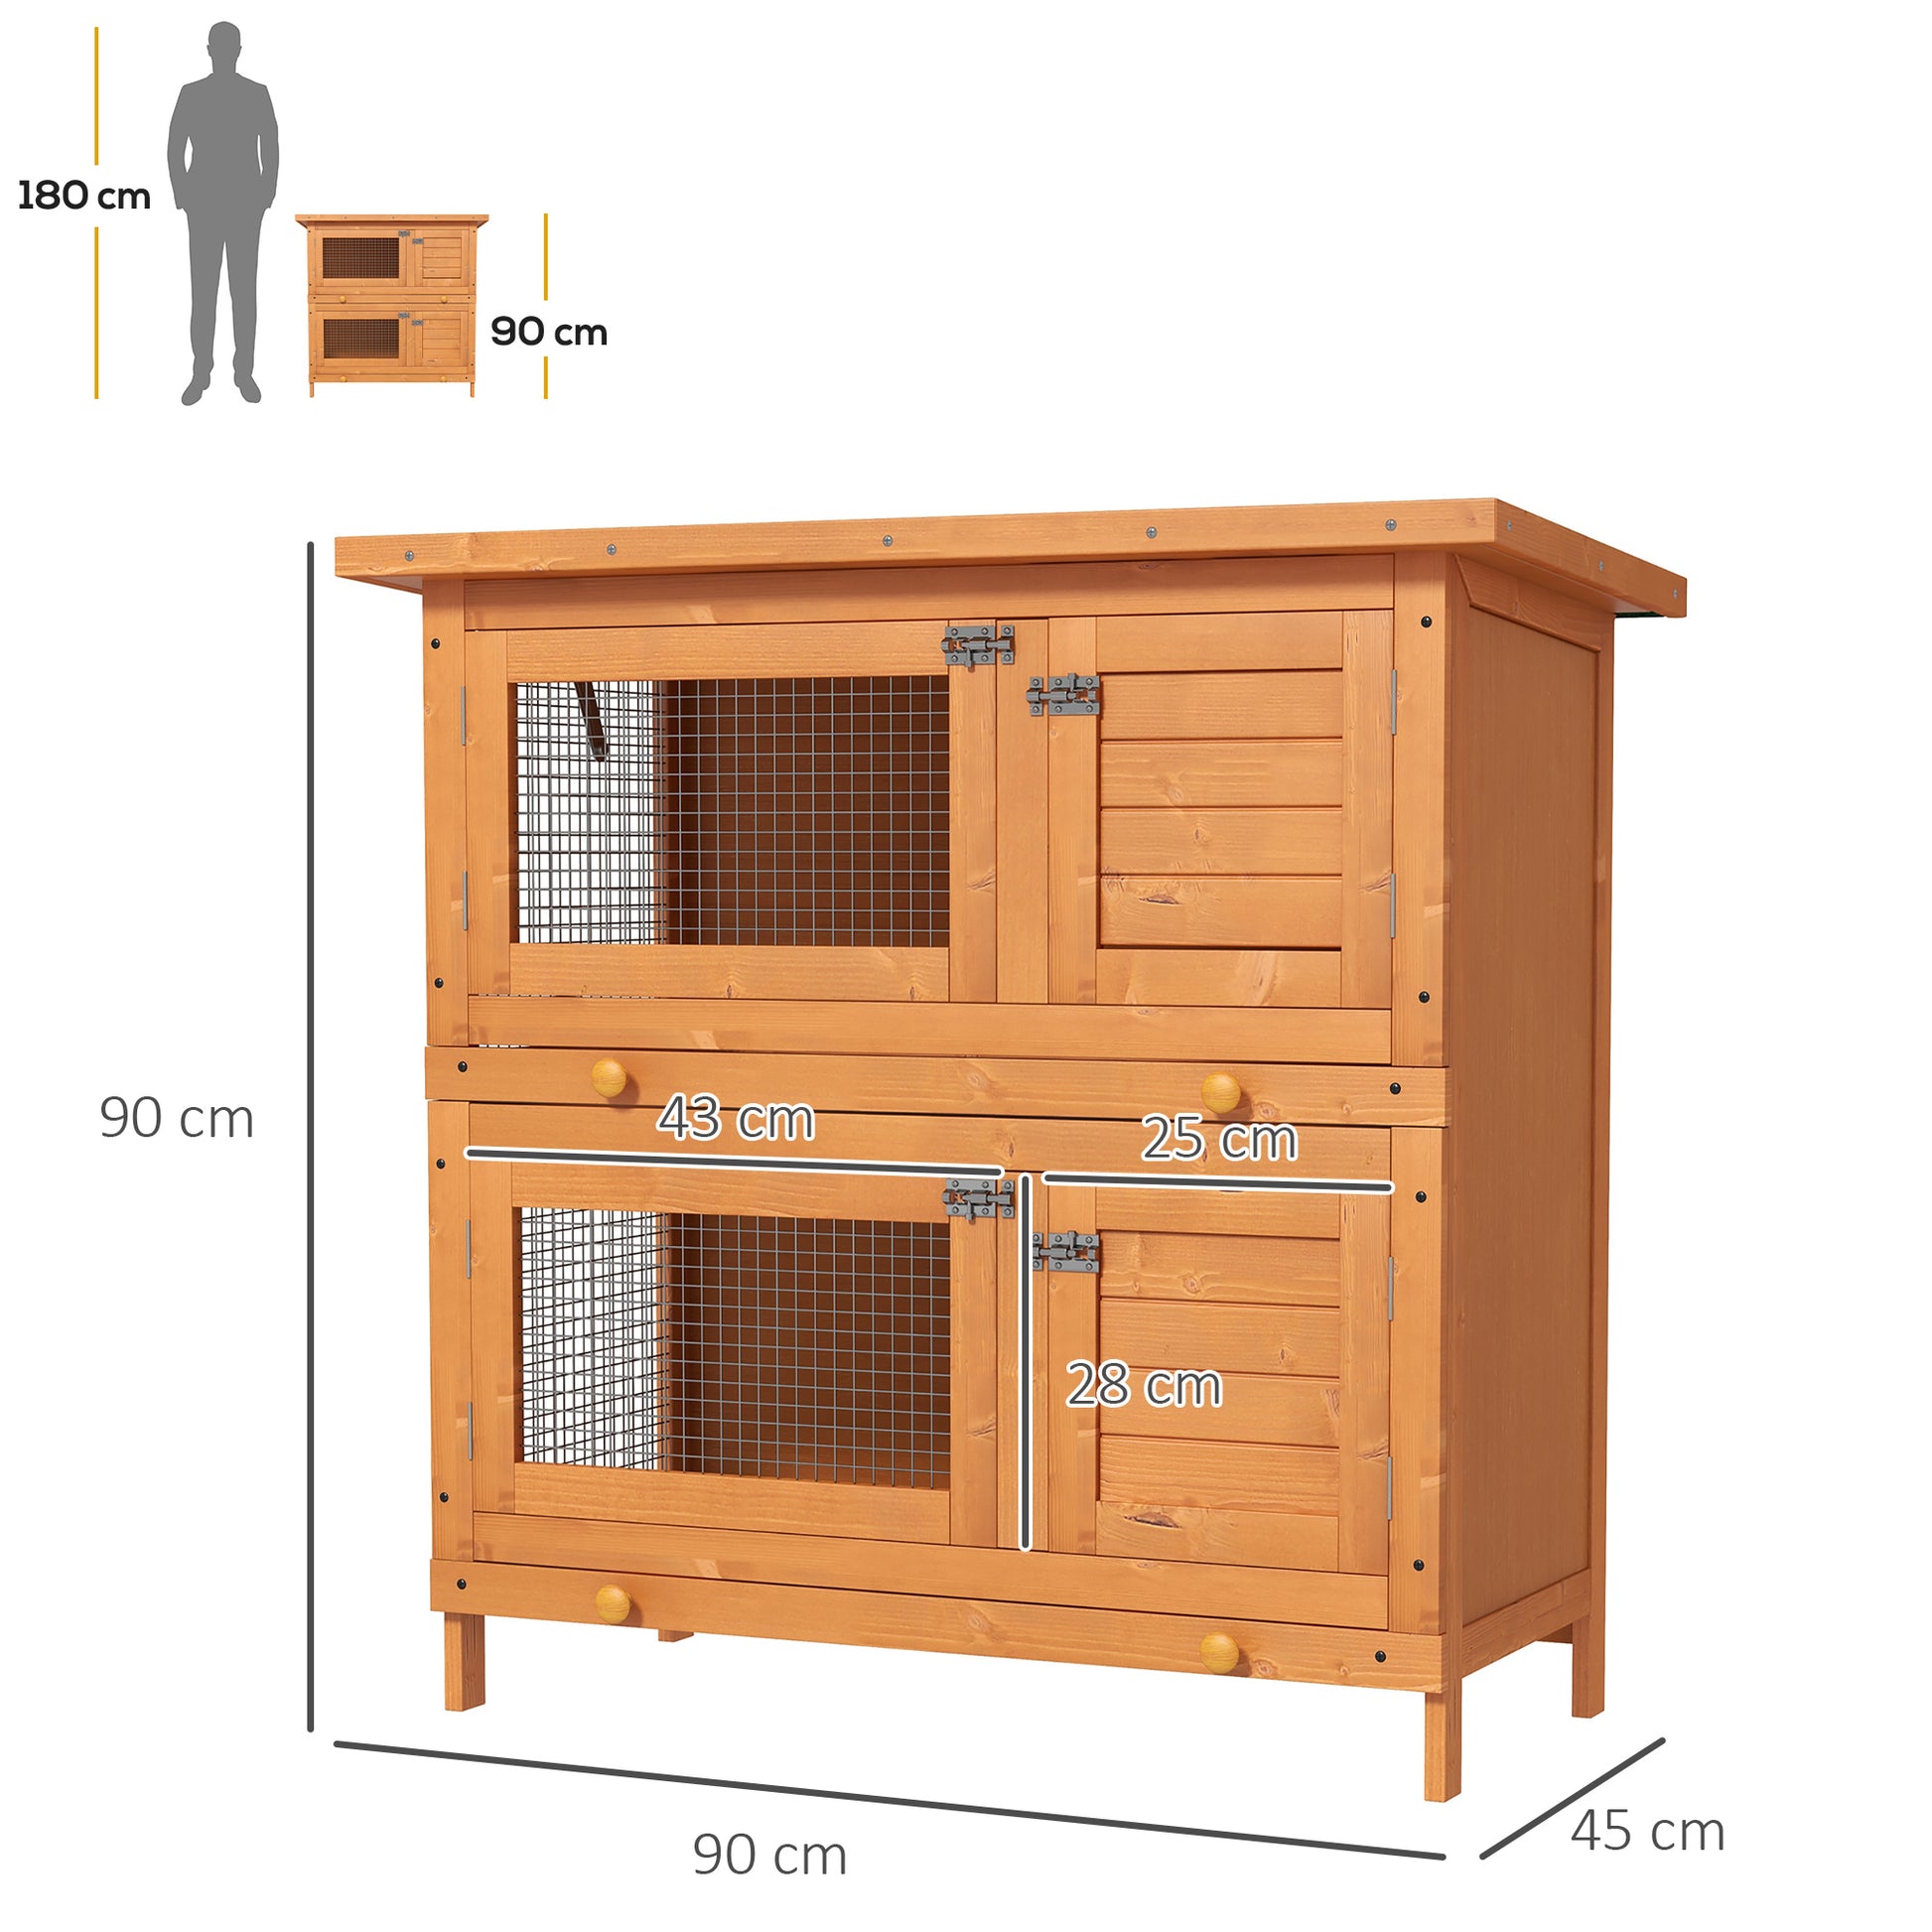 Wooden Rabbit Hutch, 2 Tiers Bunny House, Rabbit Cage w/ Slide-Out Tray, Small Animal House, Pawhut, 3